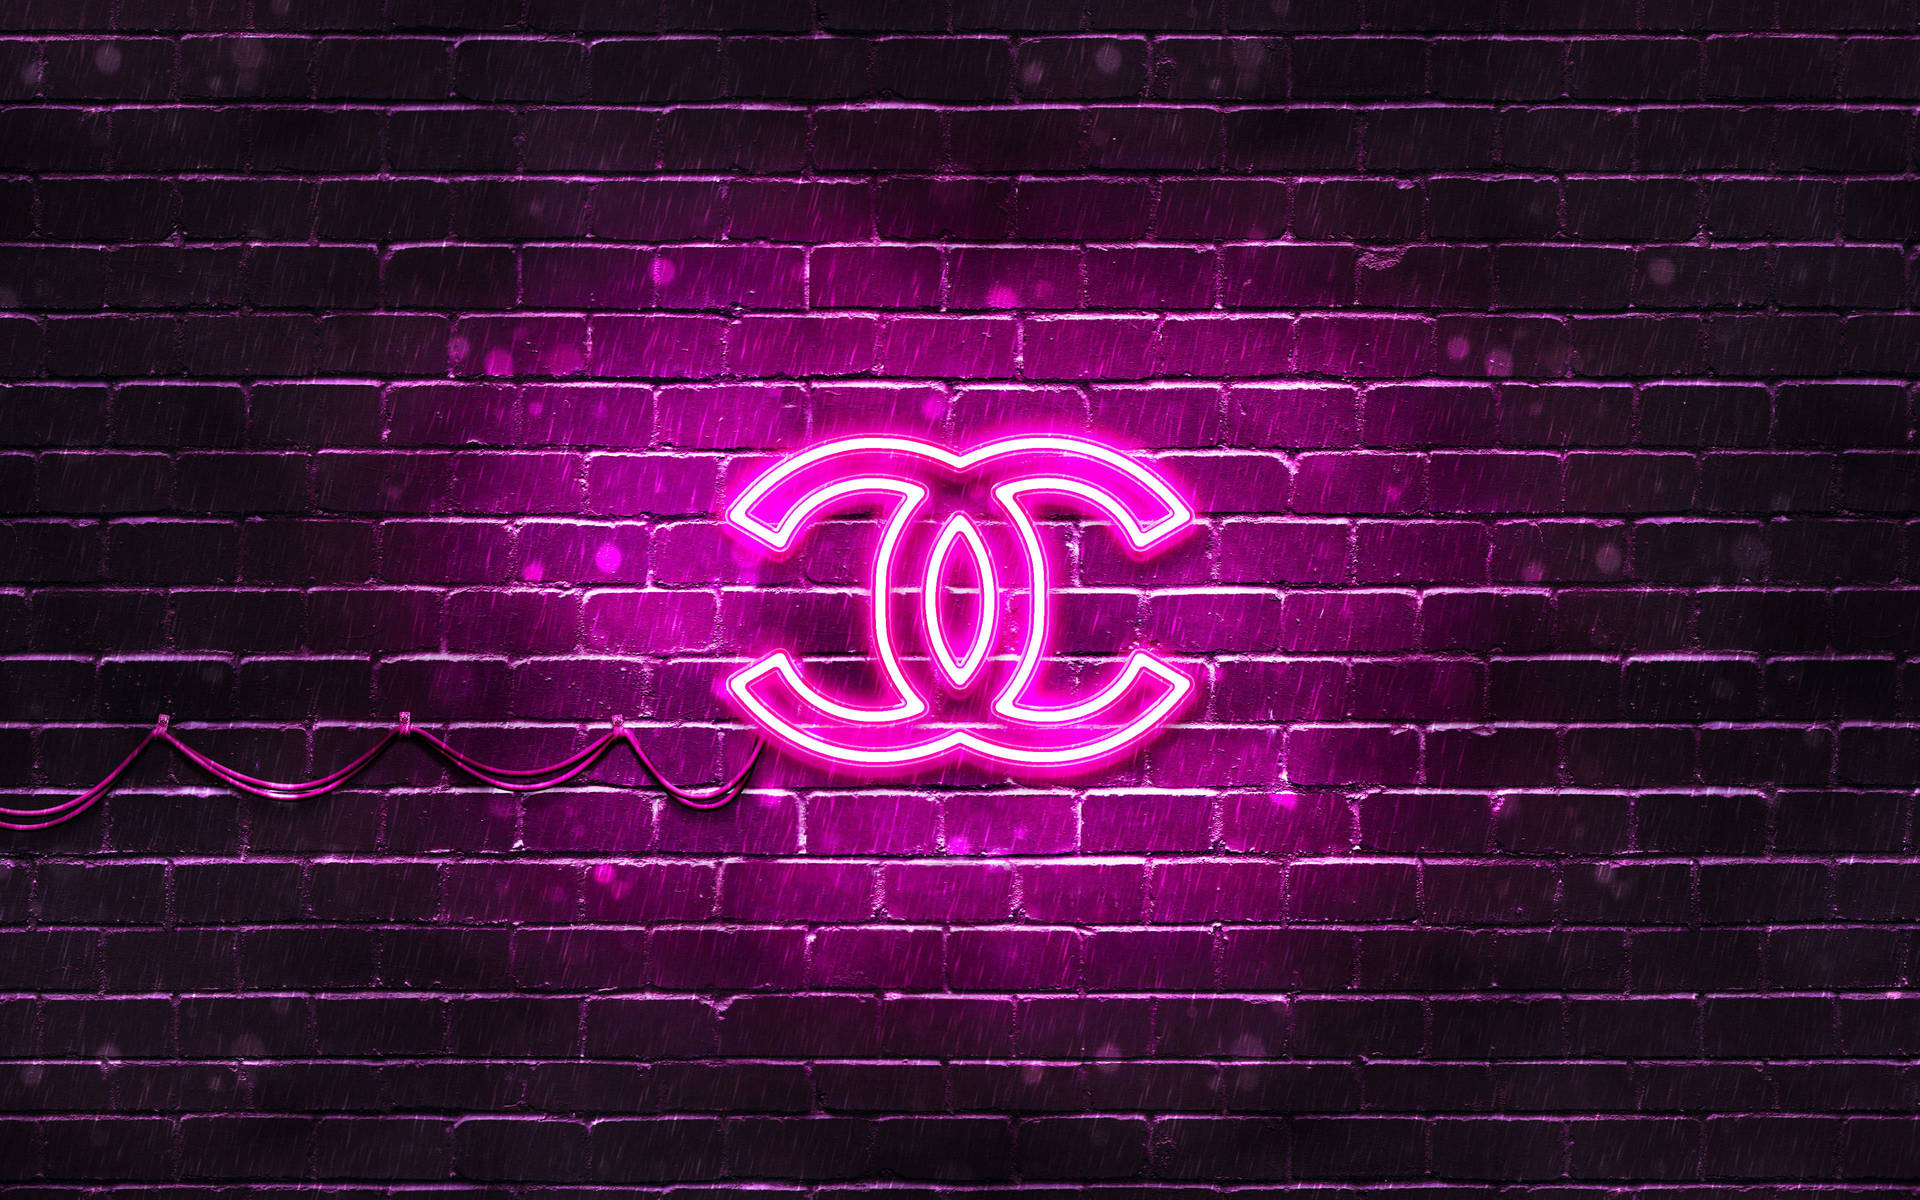 View and Download highresolution Chanel And Coco Chanel Image  Pink  Chanel Logo for free The image is transparent   Chanel background Pink  chanel Chanel logo